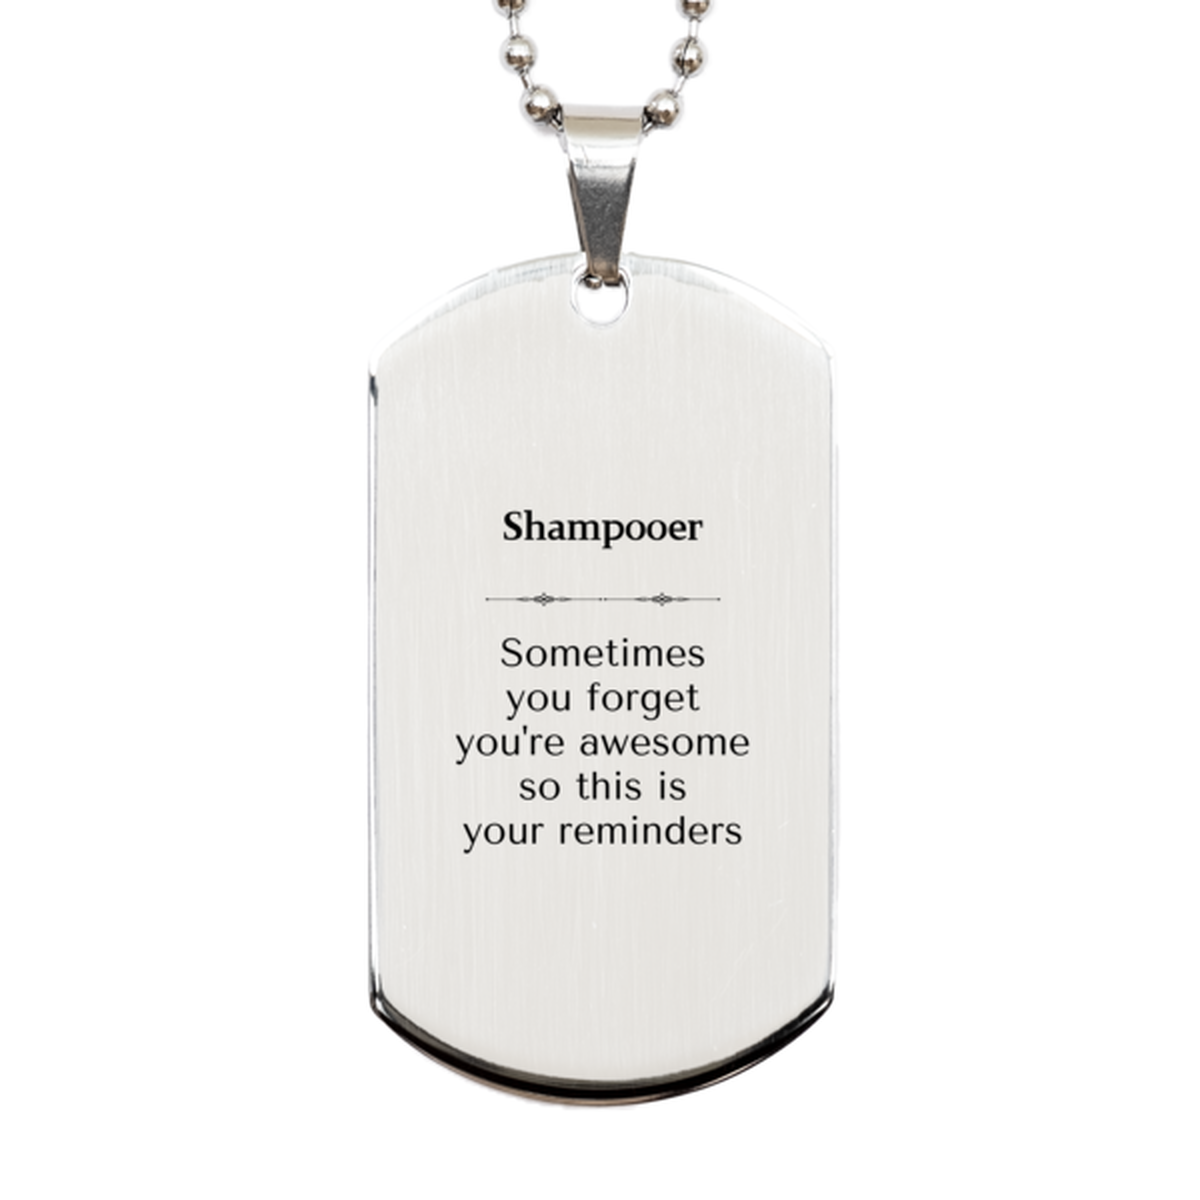 Sentimental Shampooer Silver Dog Tag, Shampooer Sometimes you forget you're awesome so this is your reminders, Graduation Christmas Birthday Gifts for Shampooer, Men, Women, Coworkers